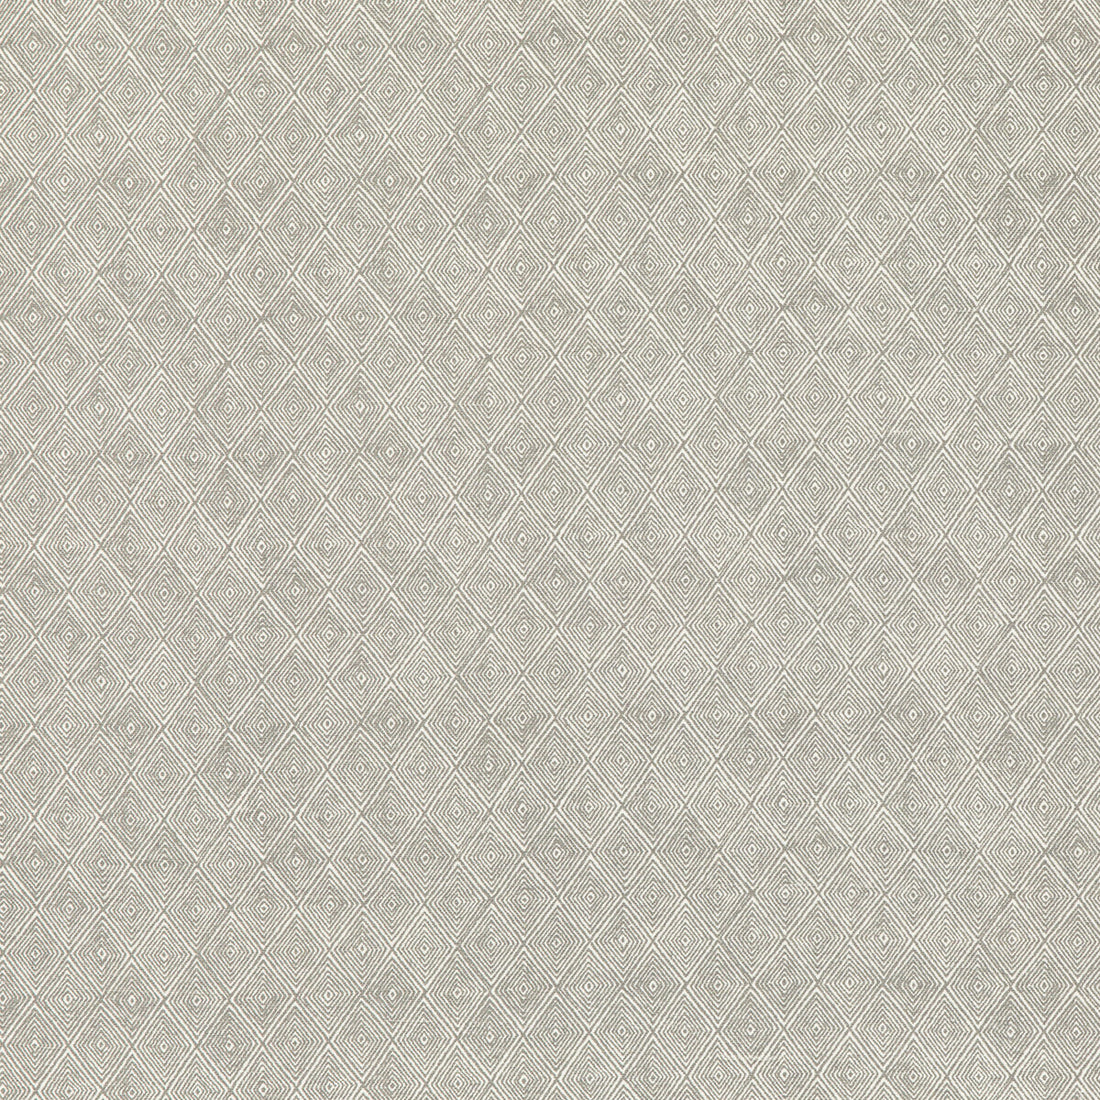 Boundary fabric in dove color - pattern ED75042.3.0 - by Threads in the Nala Prints collection